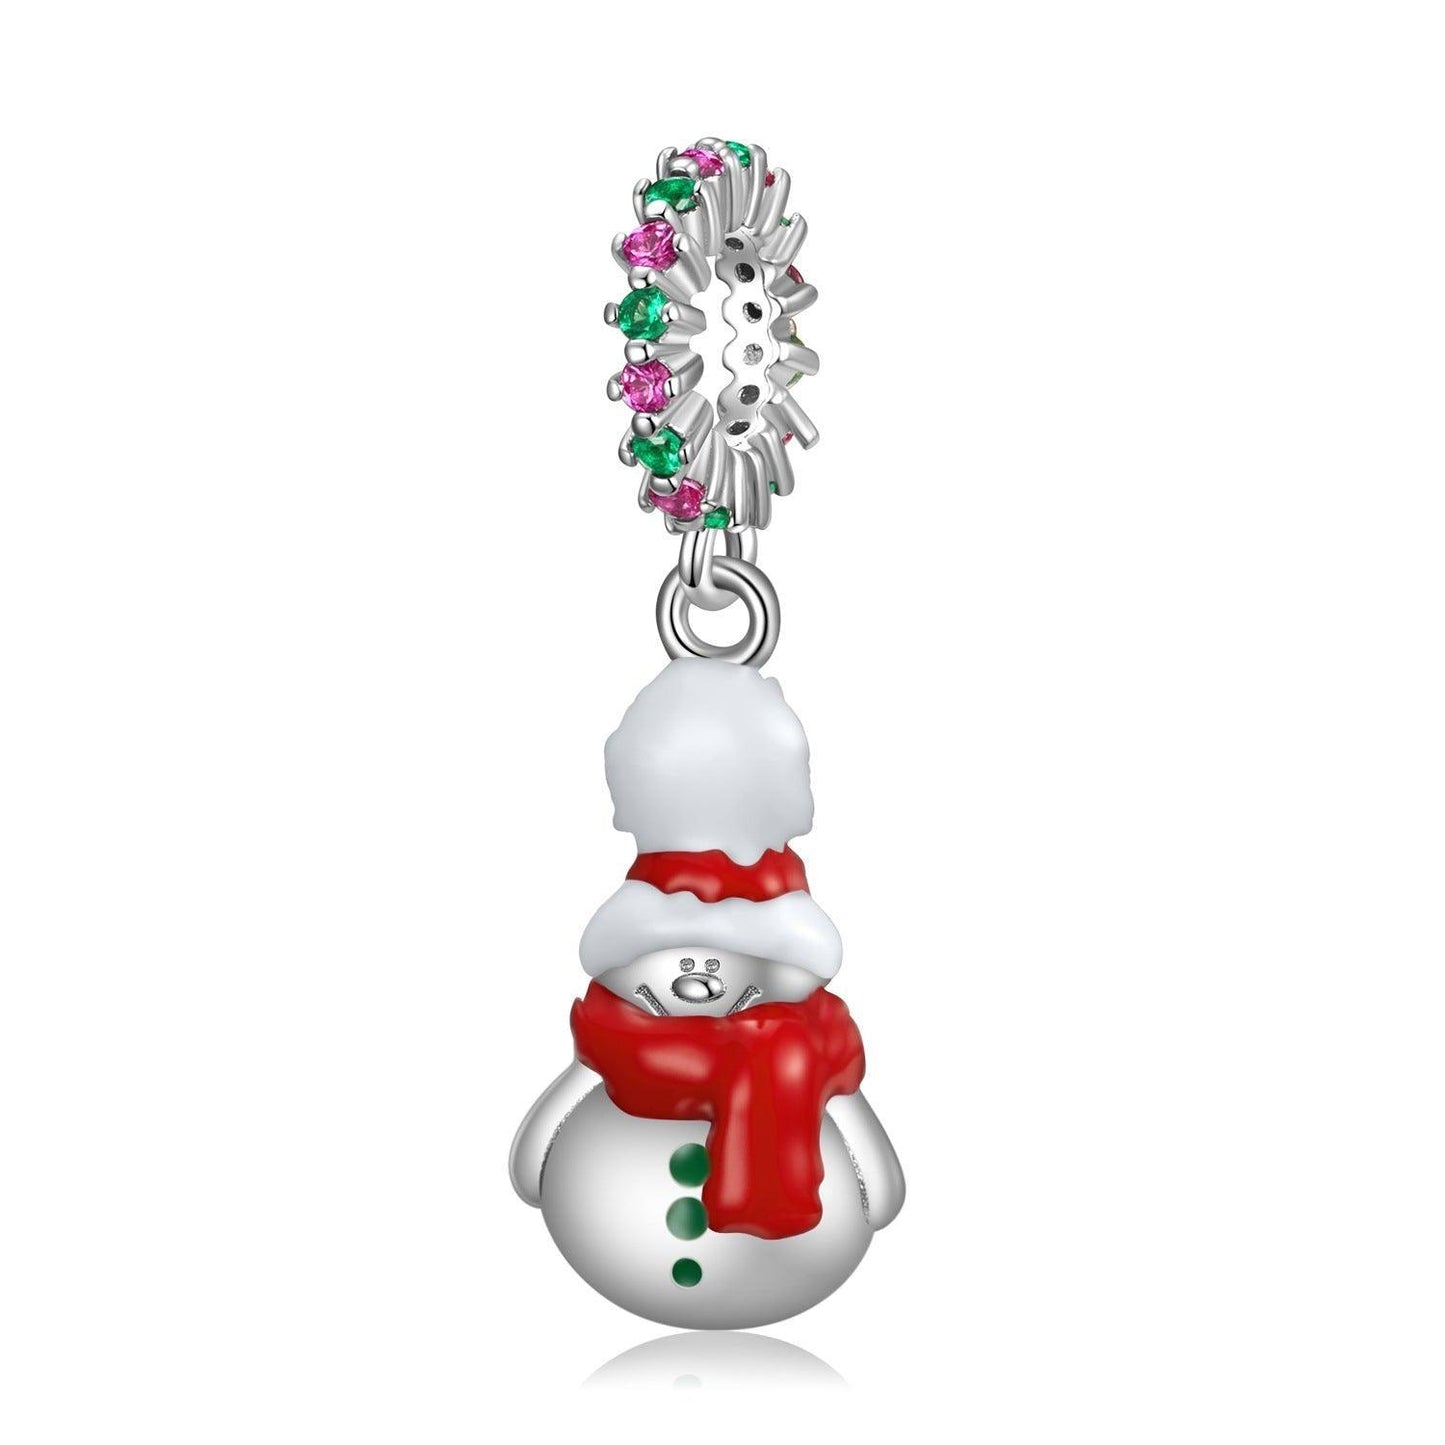 Christmas Snowman S925 Sterling Silver Charm Bracelet Beads in 2023 | Christmas Snowman S925 Sterling Silver Charm Bracelet Beads - undefined | Charm Bracelet, Christmas Snowman Charm Bracelet Beads, Cute Charm, S925 Silver Charms & Pendants | From Hunny Life | hunnylife.com